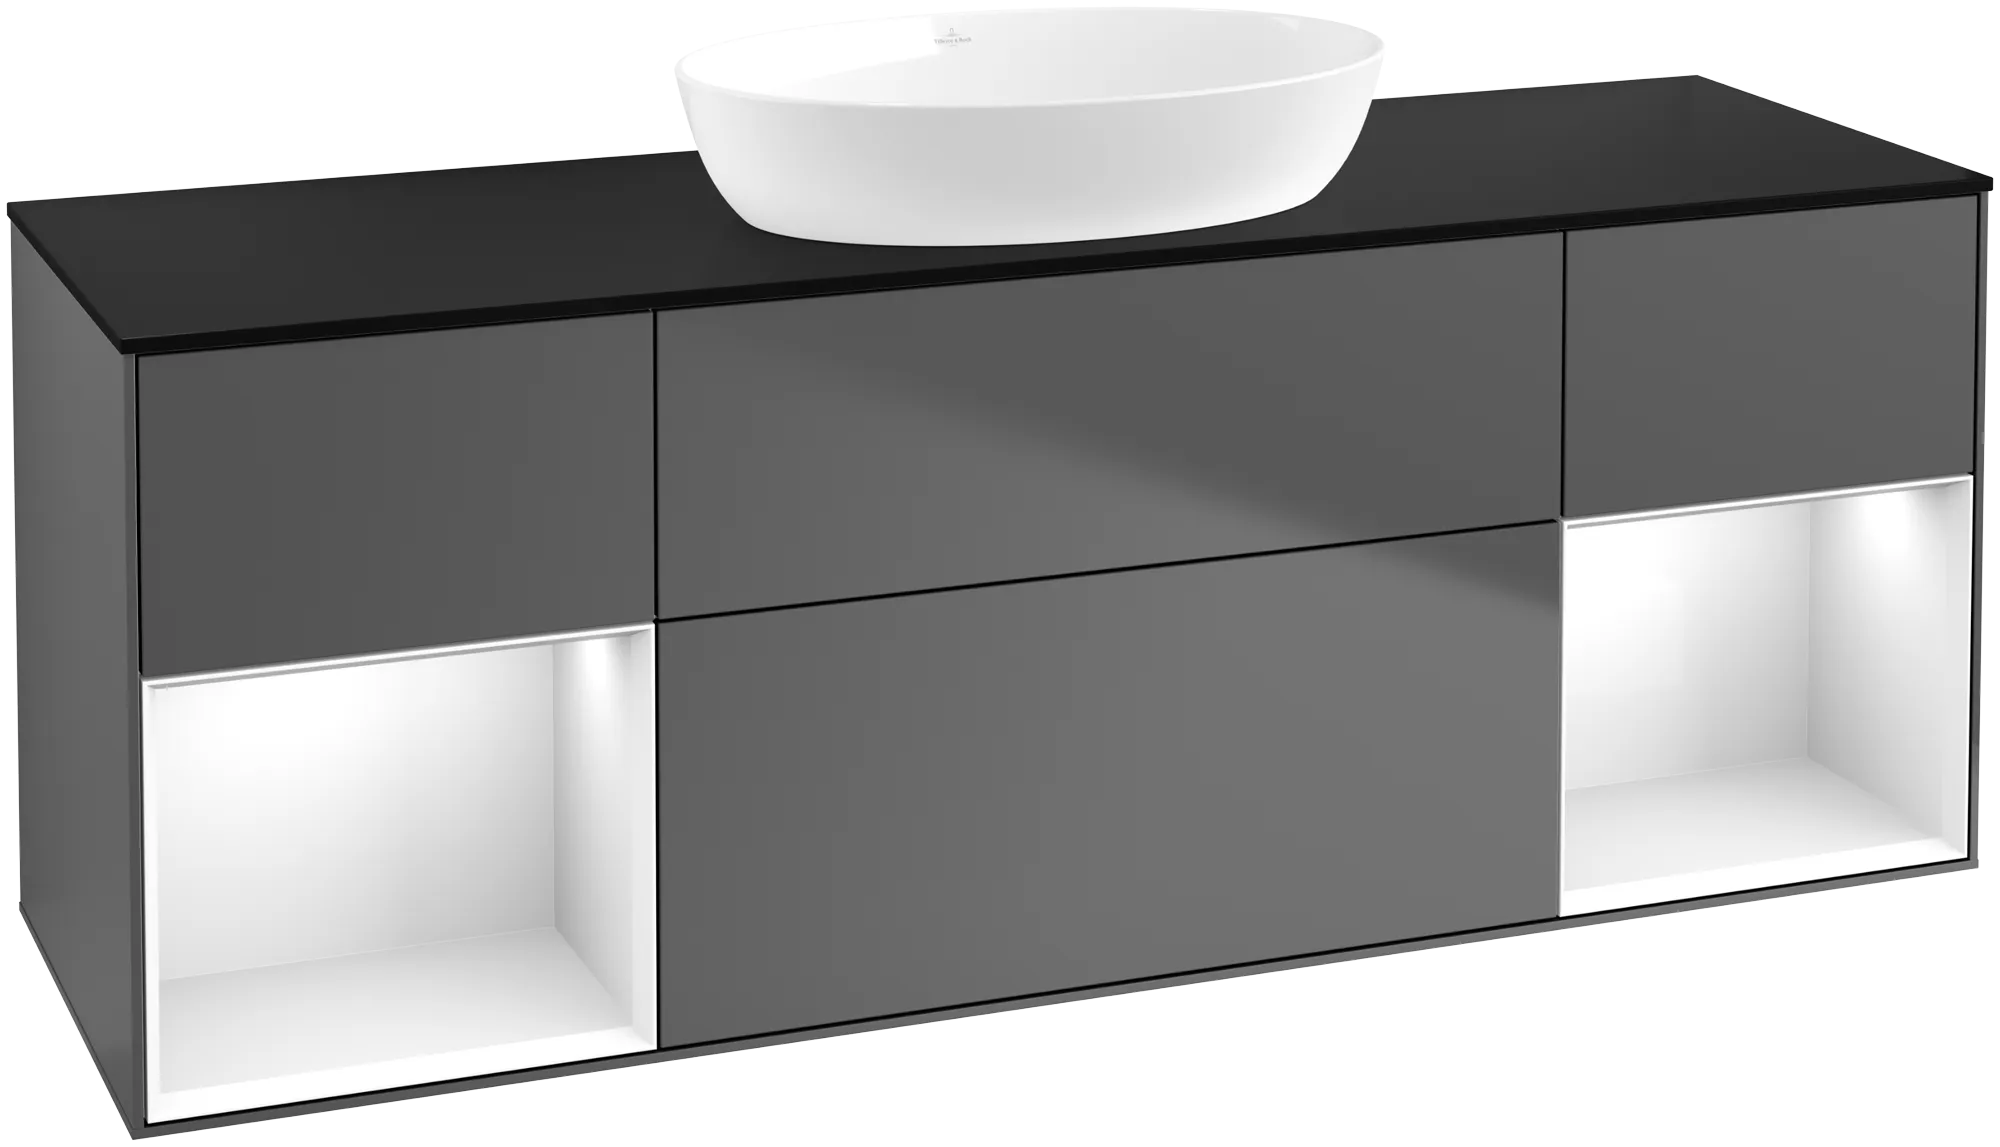 VILLEROY BOCH Finion Vanity unit, with lighting, 4 pull-out compartments, 1600 x 603 x 501 mm, Anthracite Matt Lacquer / Glossy White Lacquer / Glass Black Matt #GD02GFGK resmi